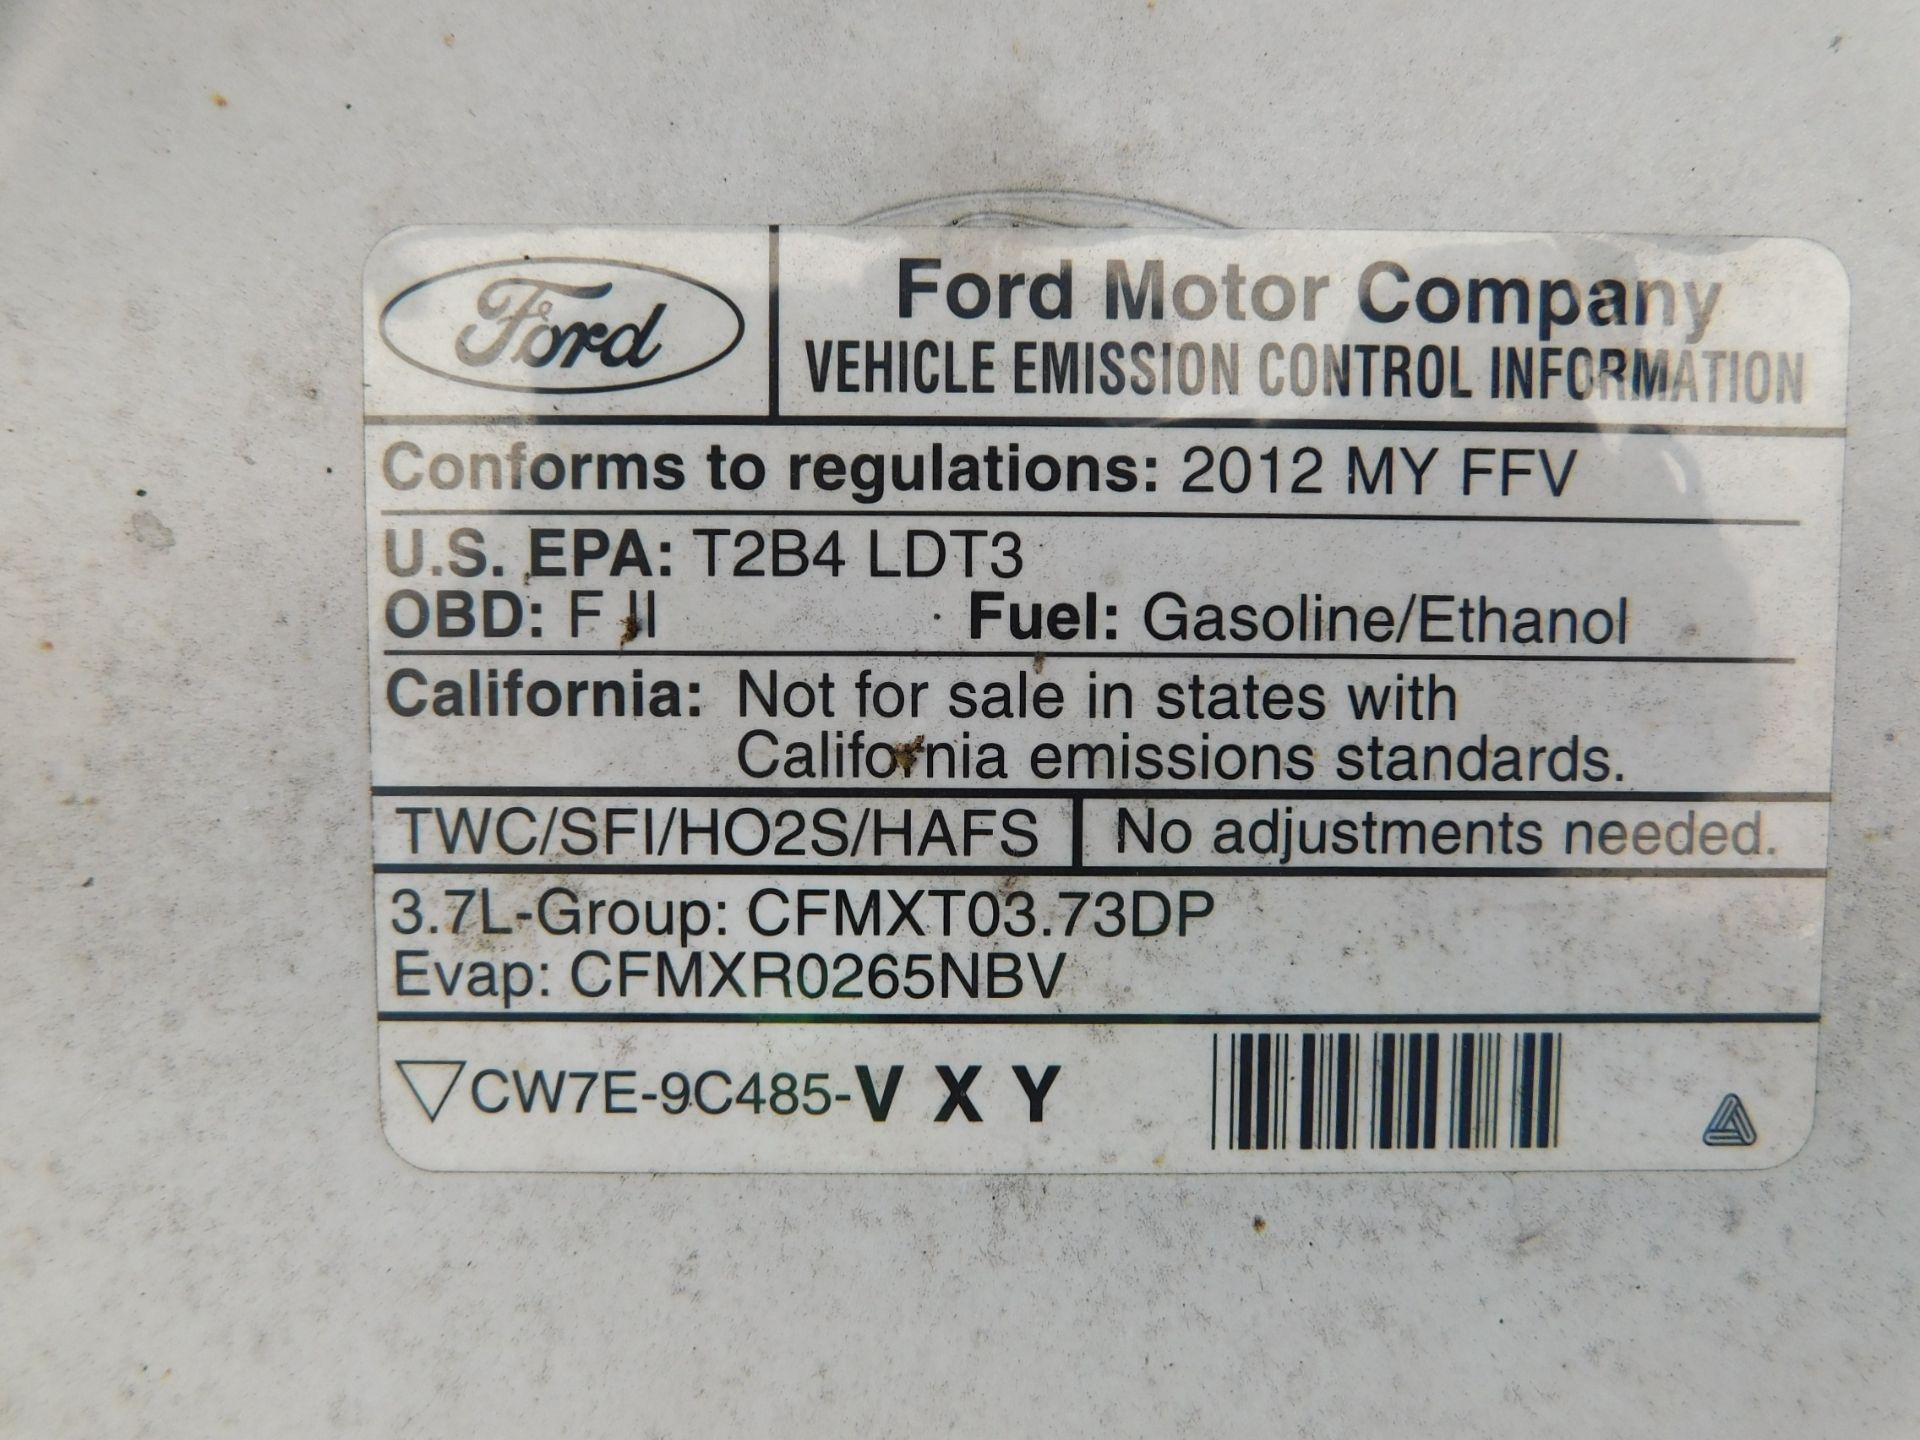 2011 Ford Pick up F-150XL vin 1FTMF1CM3CKD12942, Automatic Transmission, PW, Pl, 8'Bed w/Cap 146,289 - Image 43 of 46